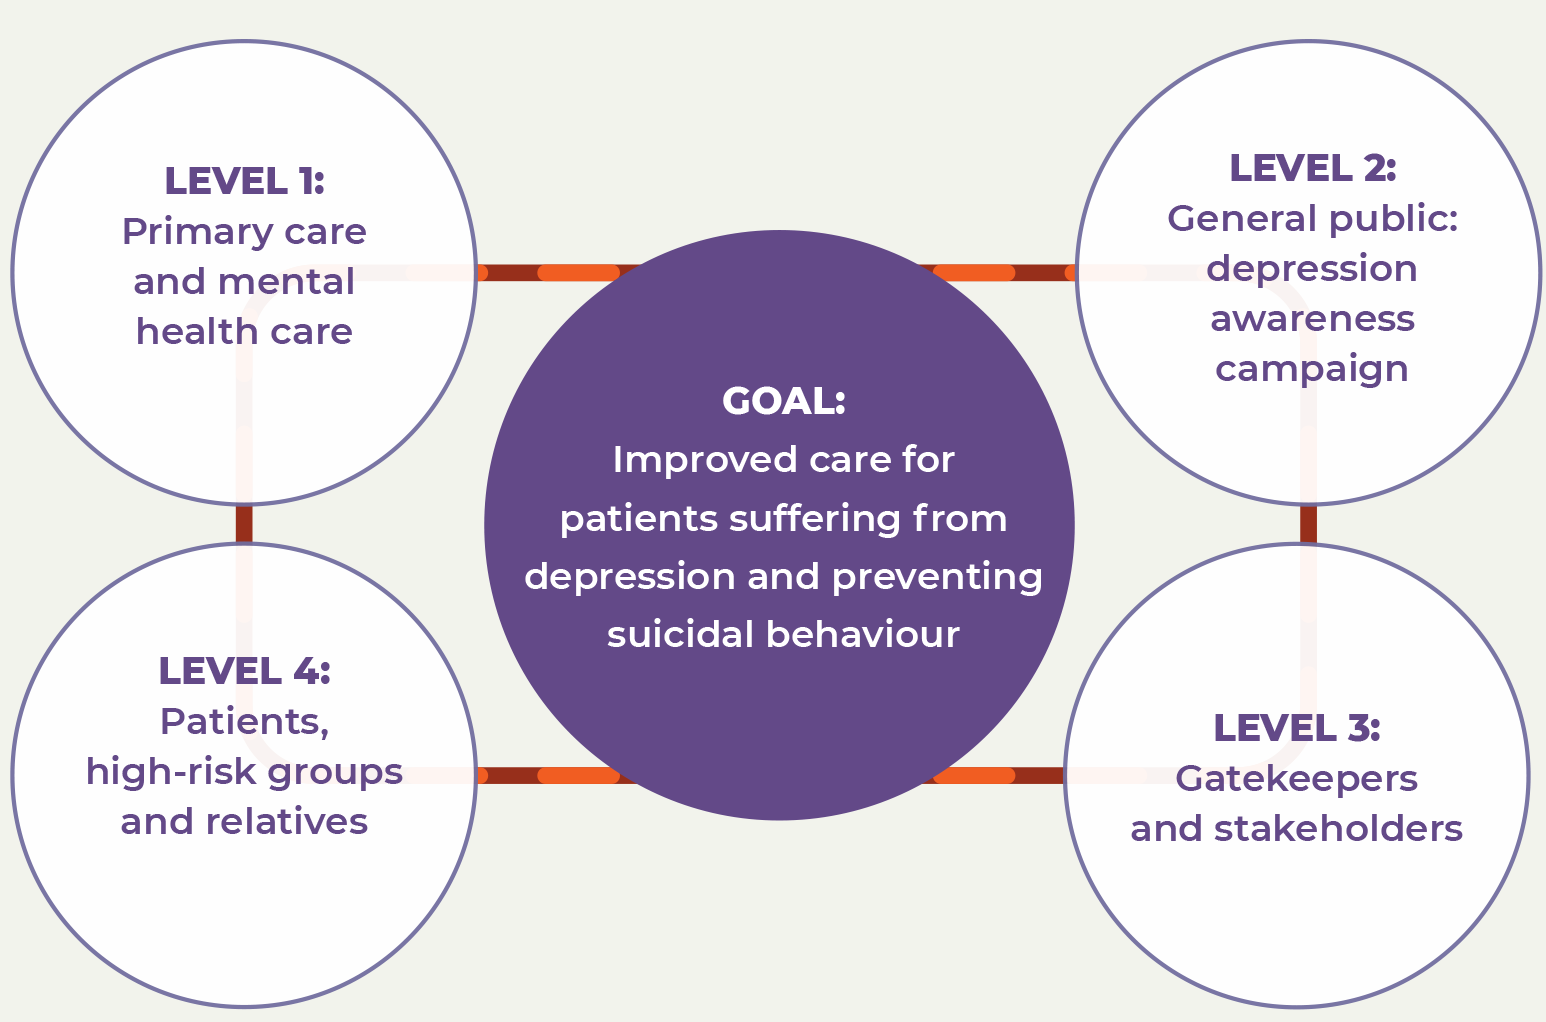 A network to fight depression: a four-level community-based intervention approach